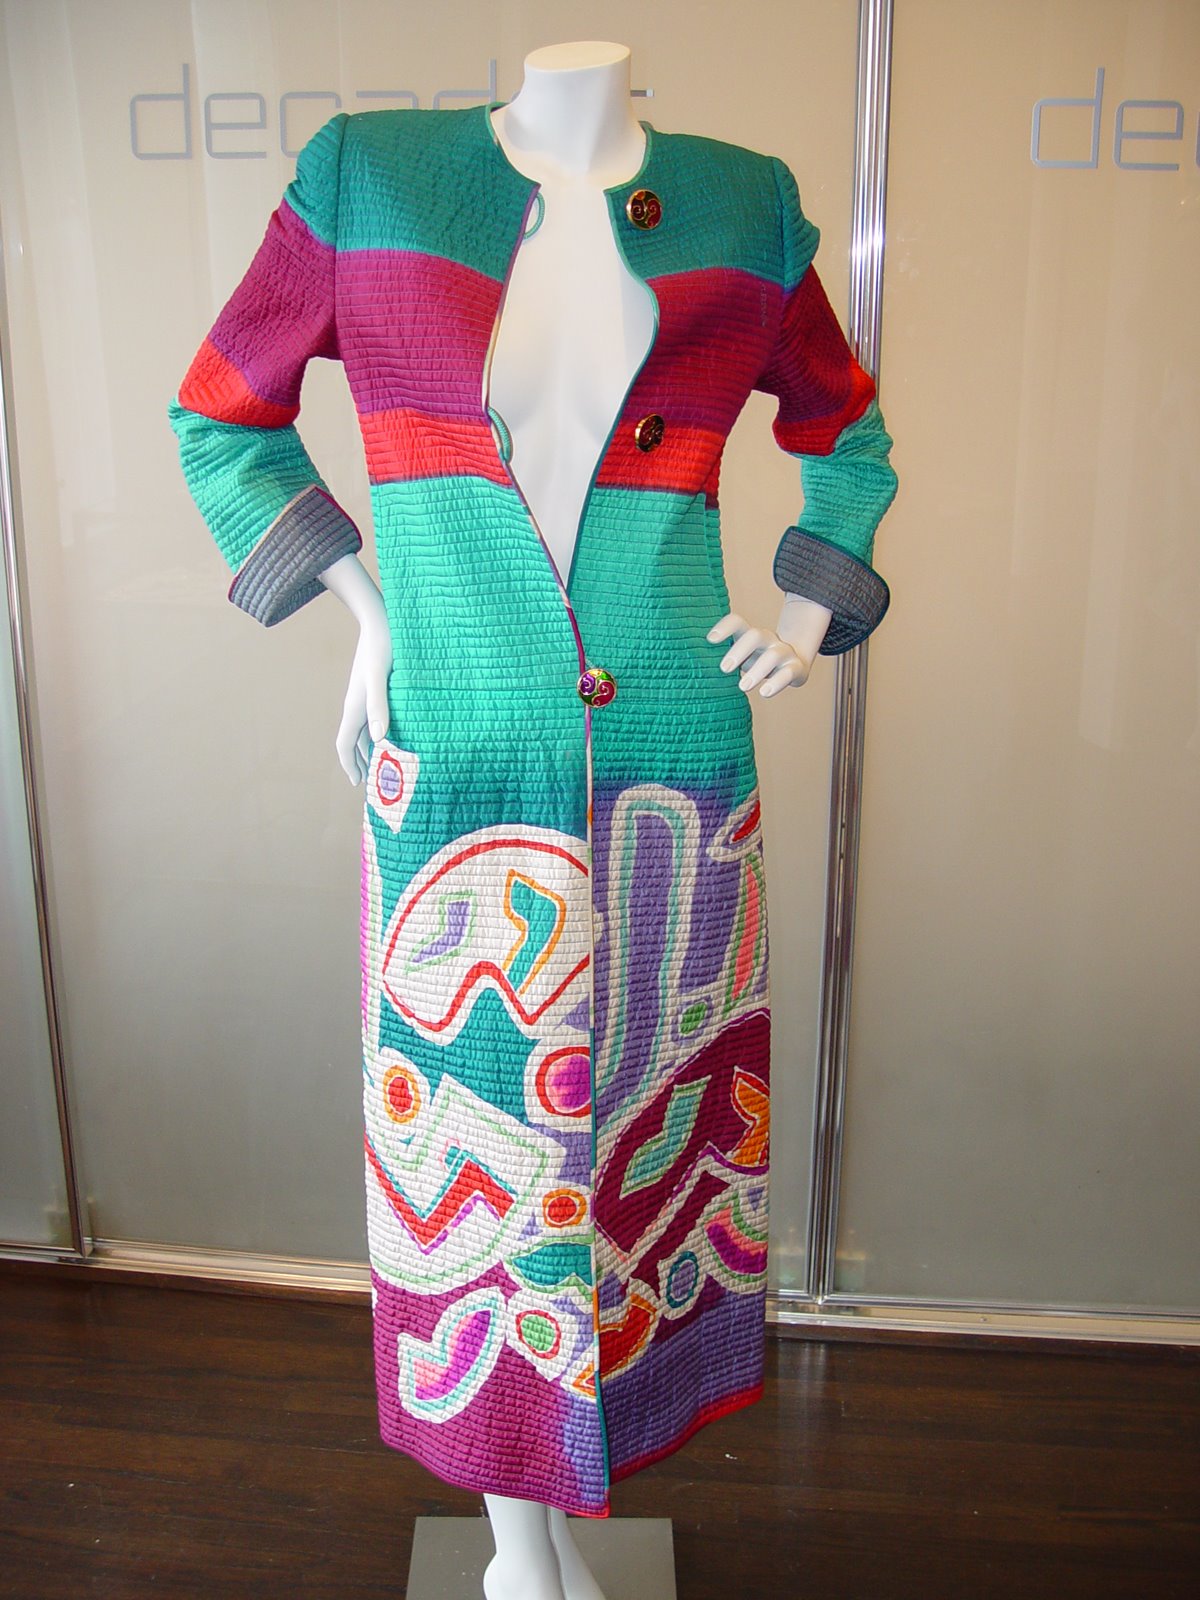 [MARY+MCFADDEN+QUILTED+AND+HANDPAINTED+EVENING+COAT.JPG.JPG]